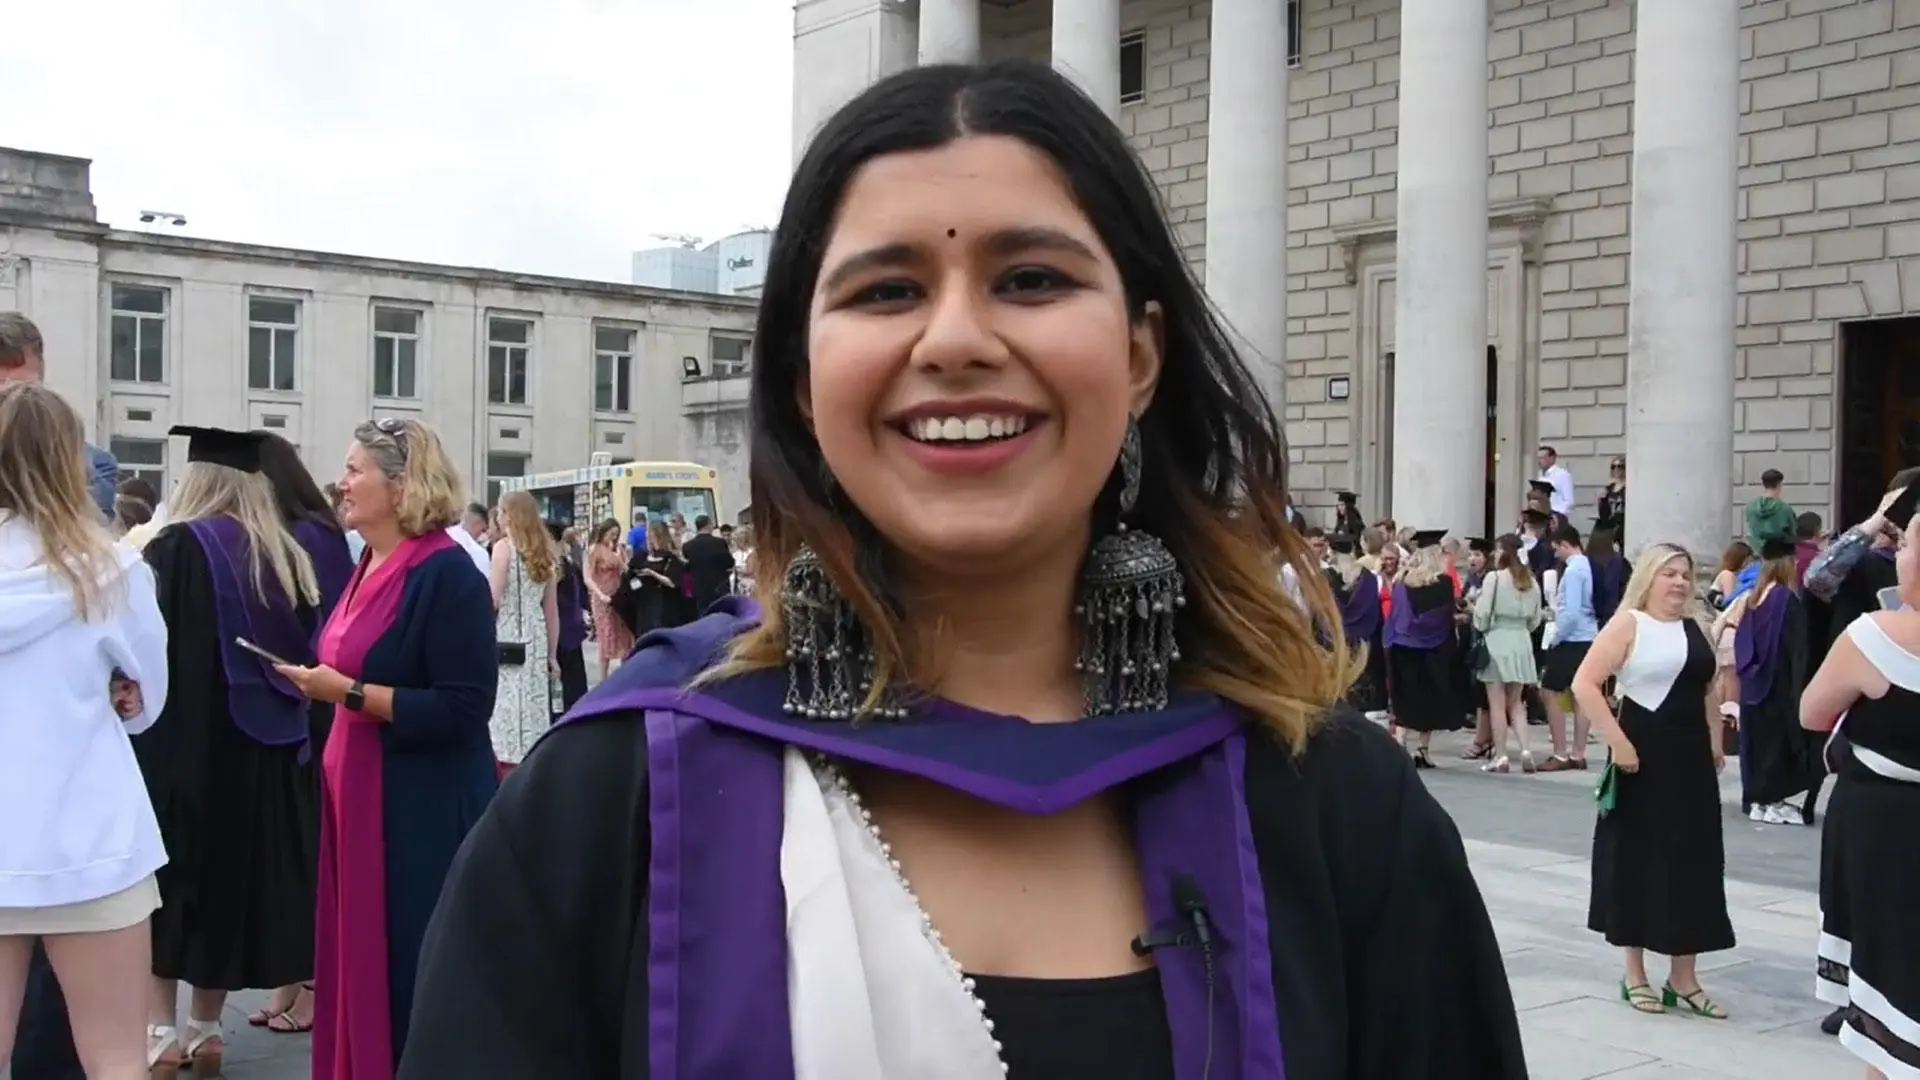 A Solent graduate stood in front of the Guildhall